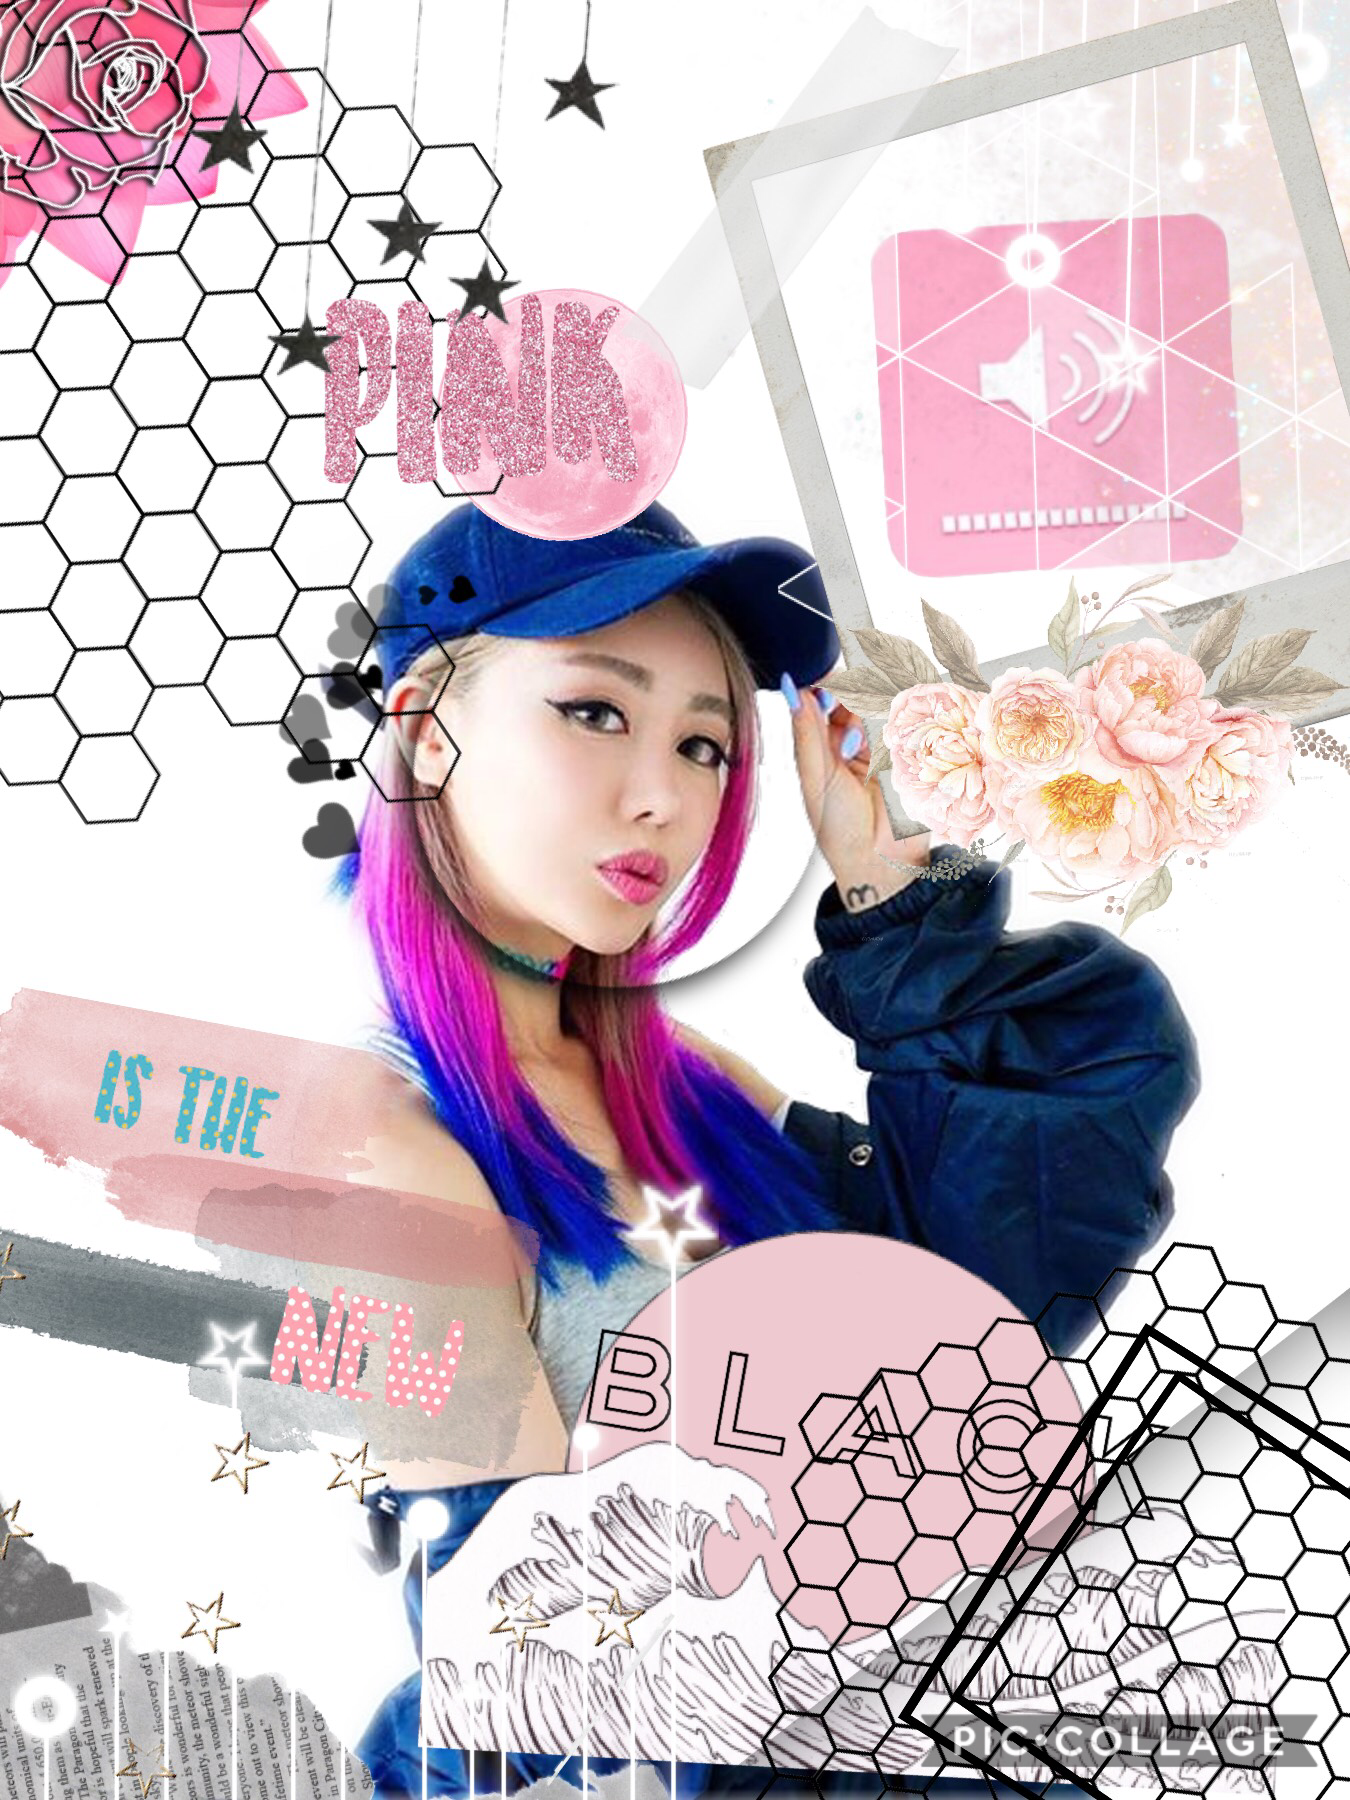 Do y’all like this one?
Wengie💜